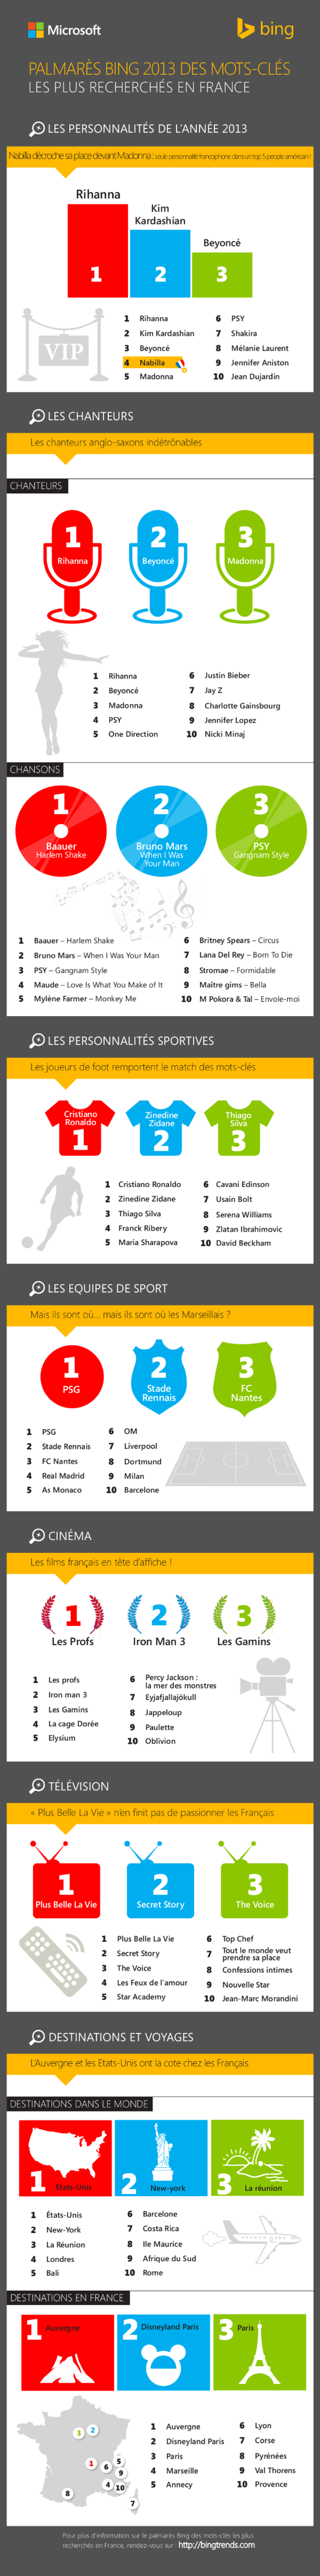 Bing-mots-cles-infographie